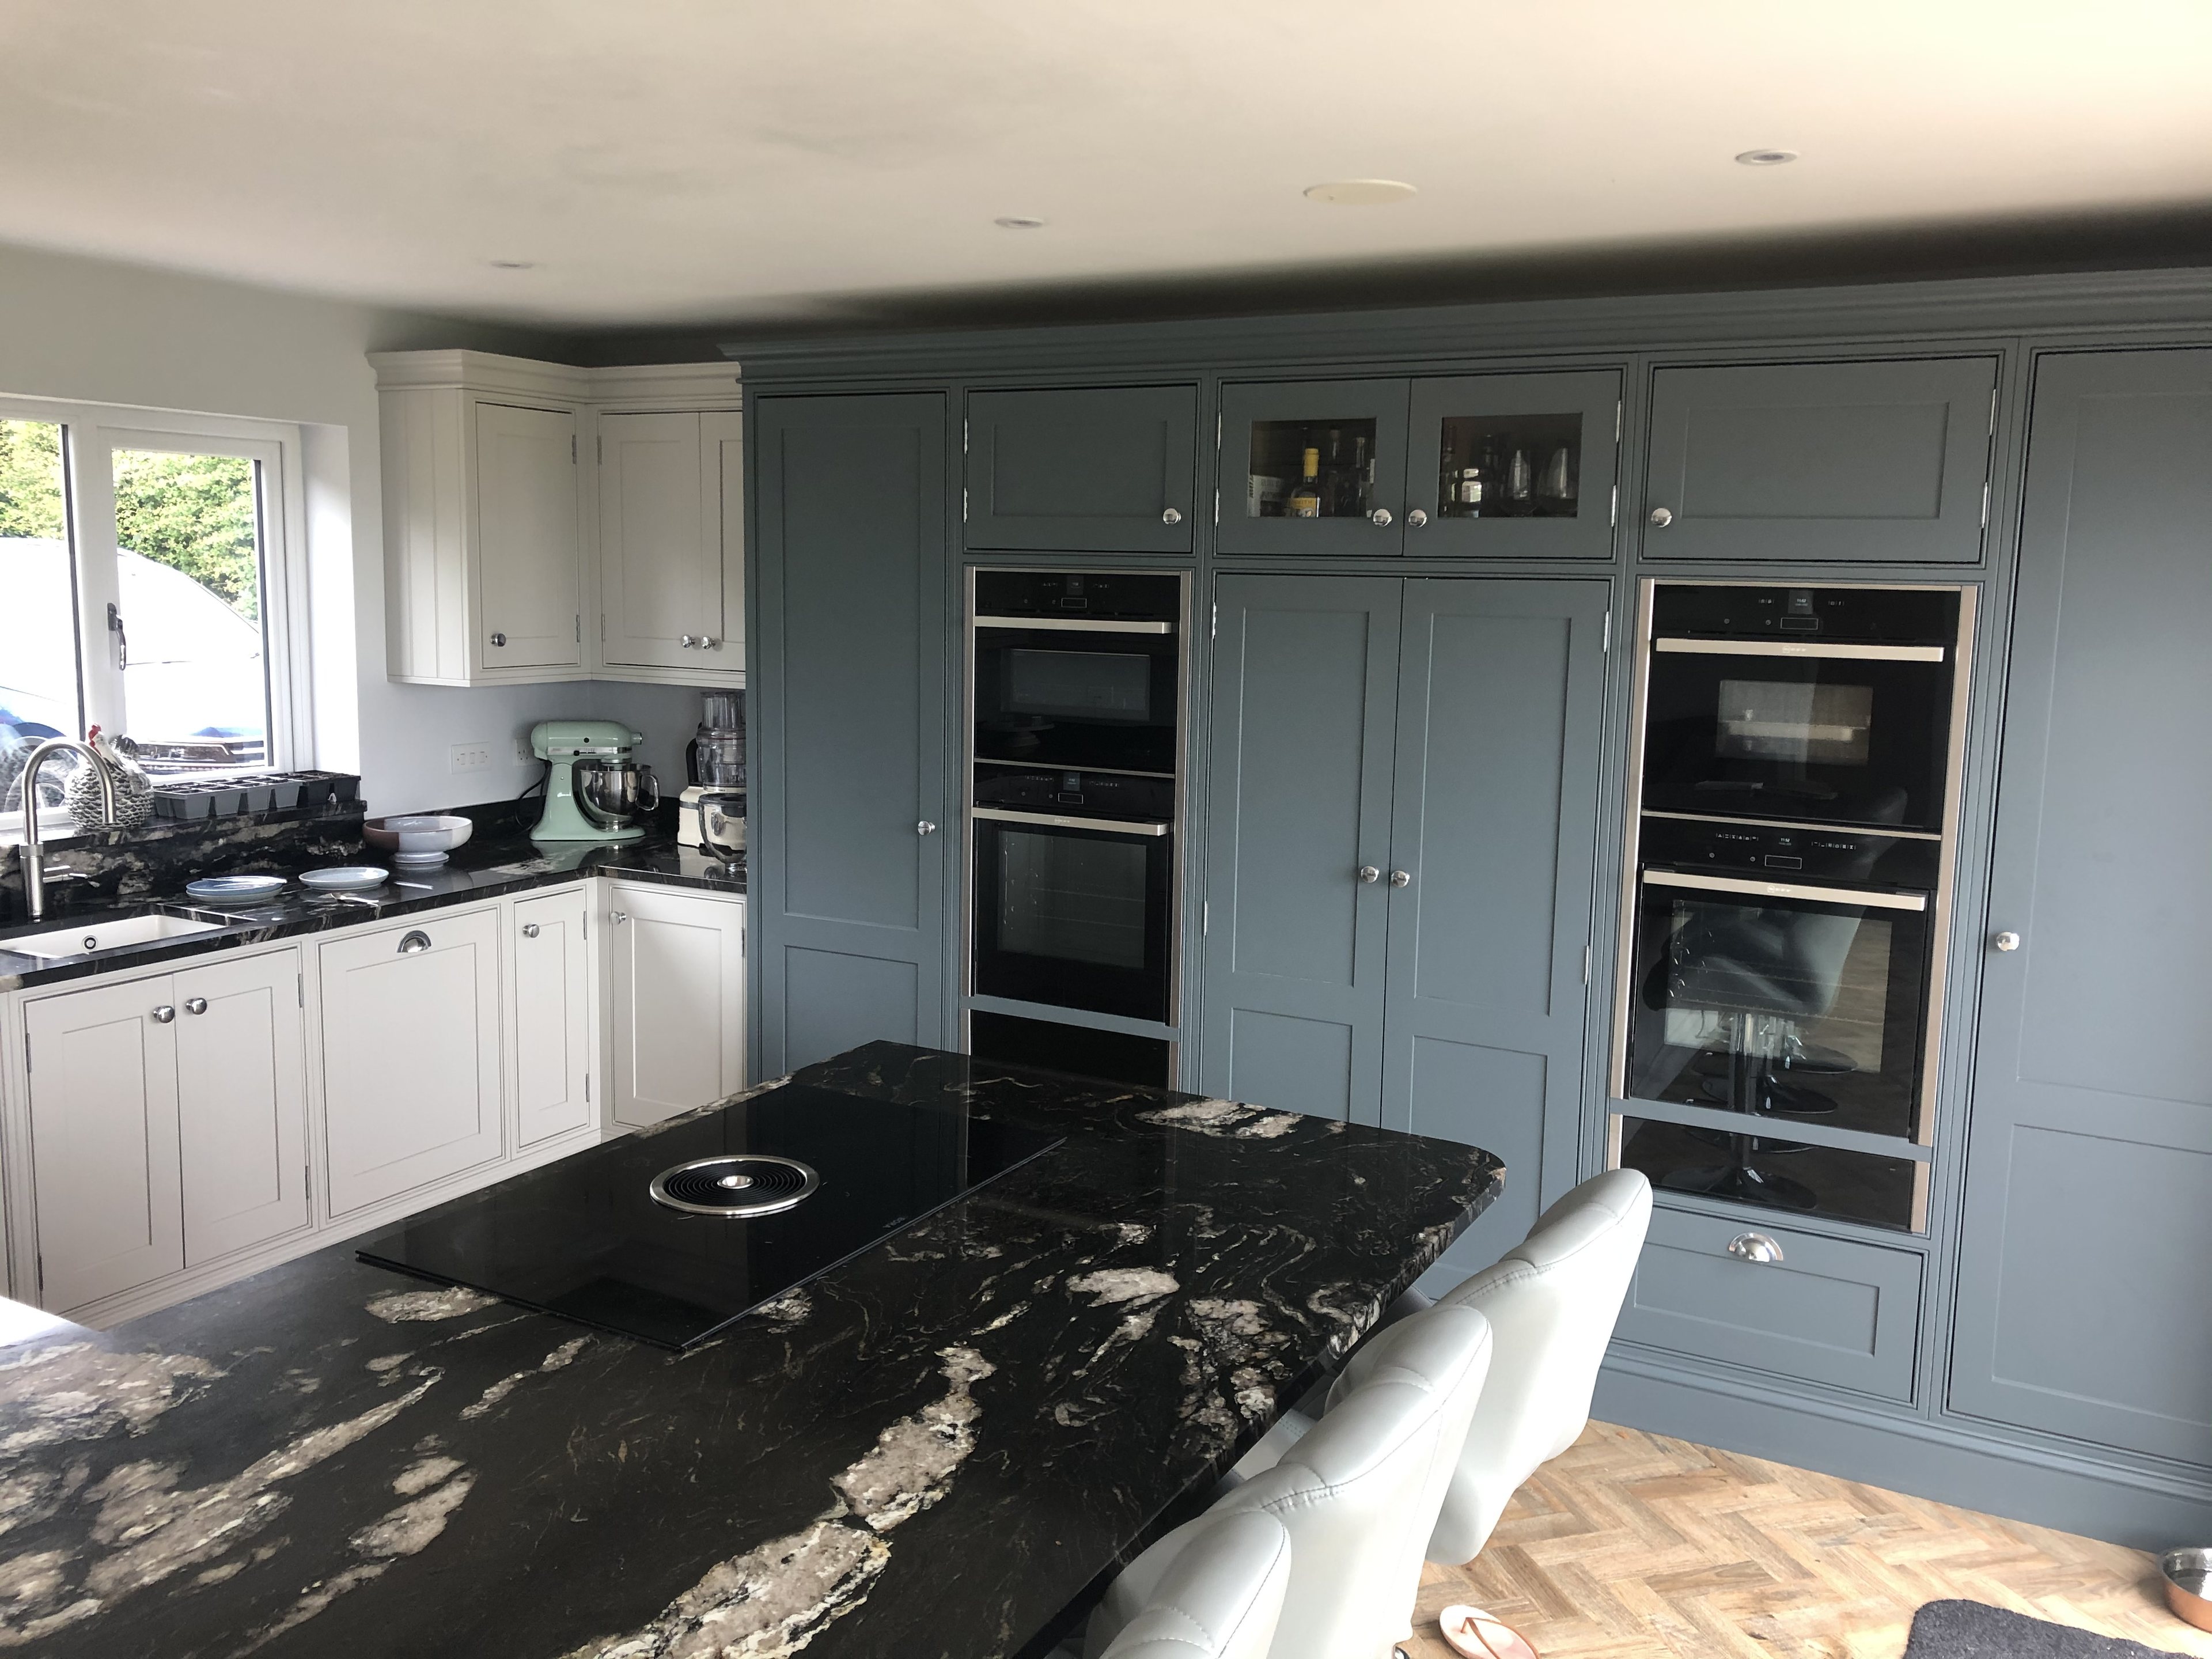 Kitchen island worktops with wow factor - Page 3 - Homes, Gardens and DIY - PistonHeads